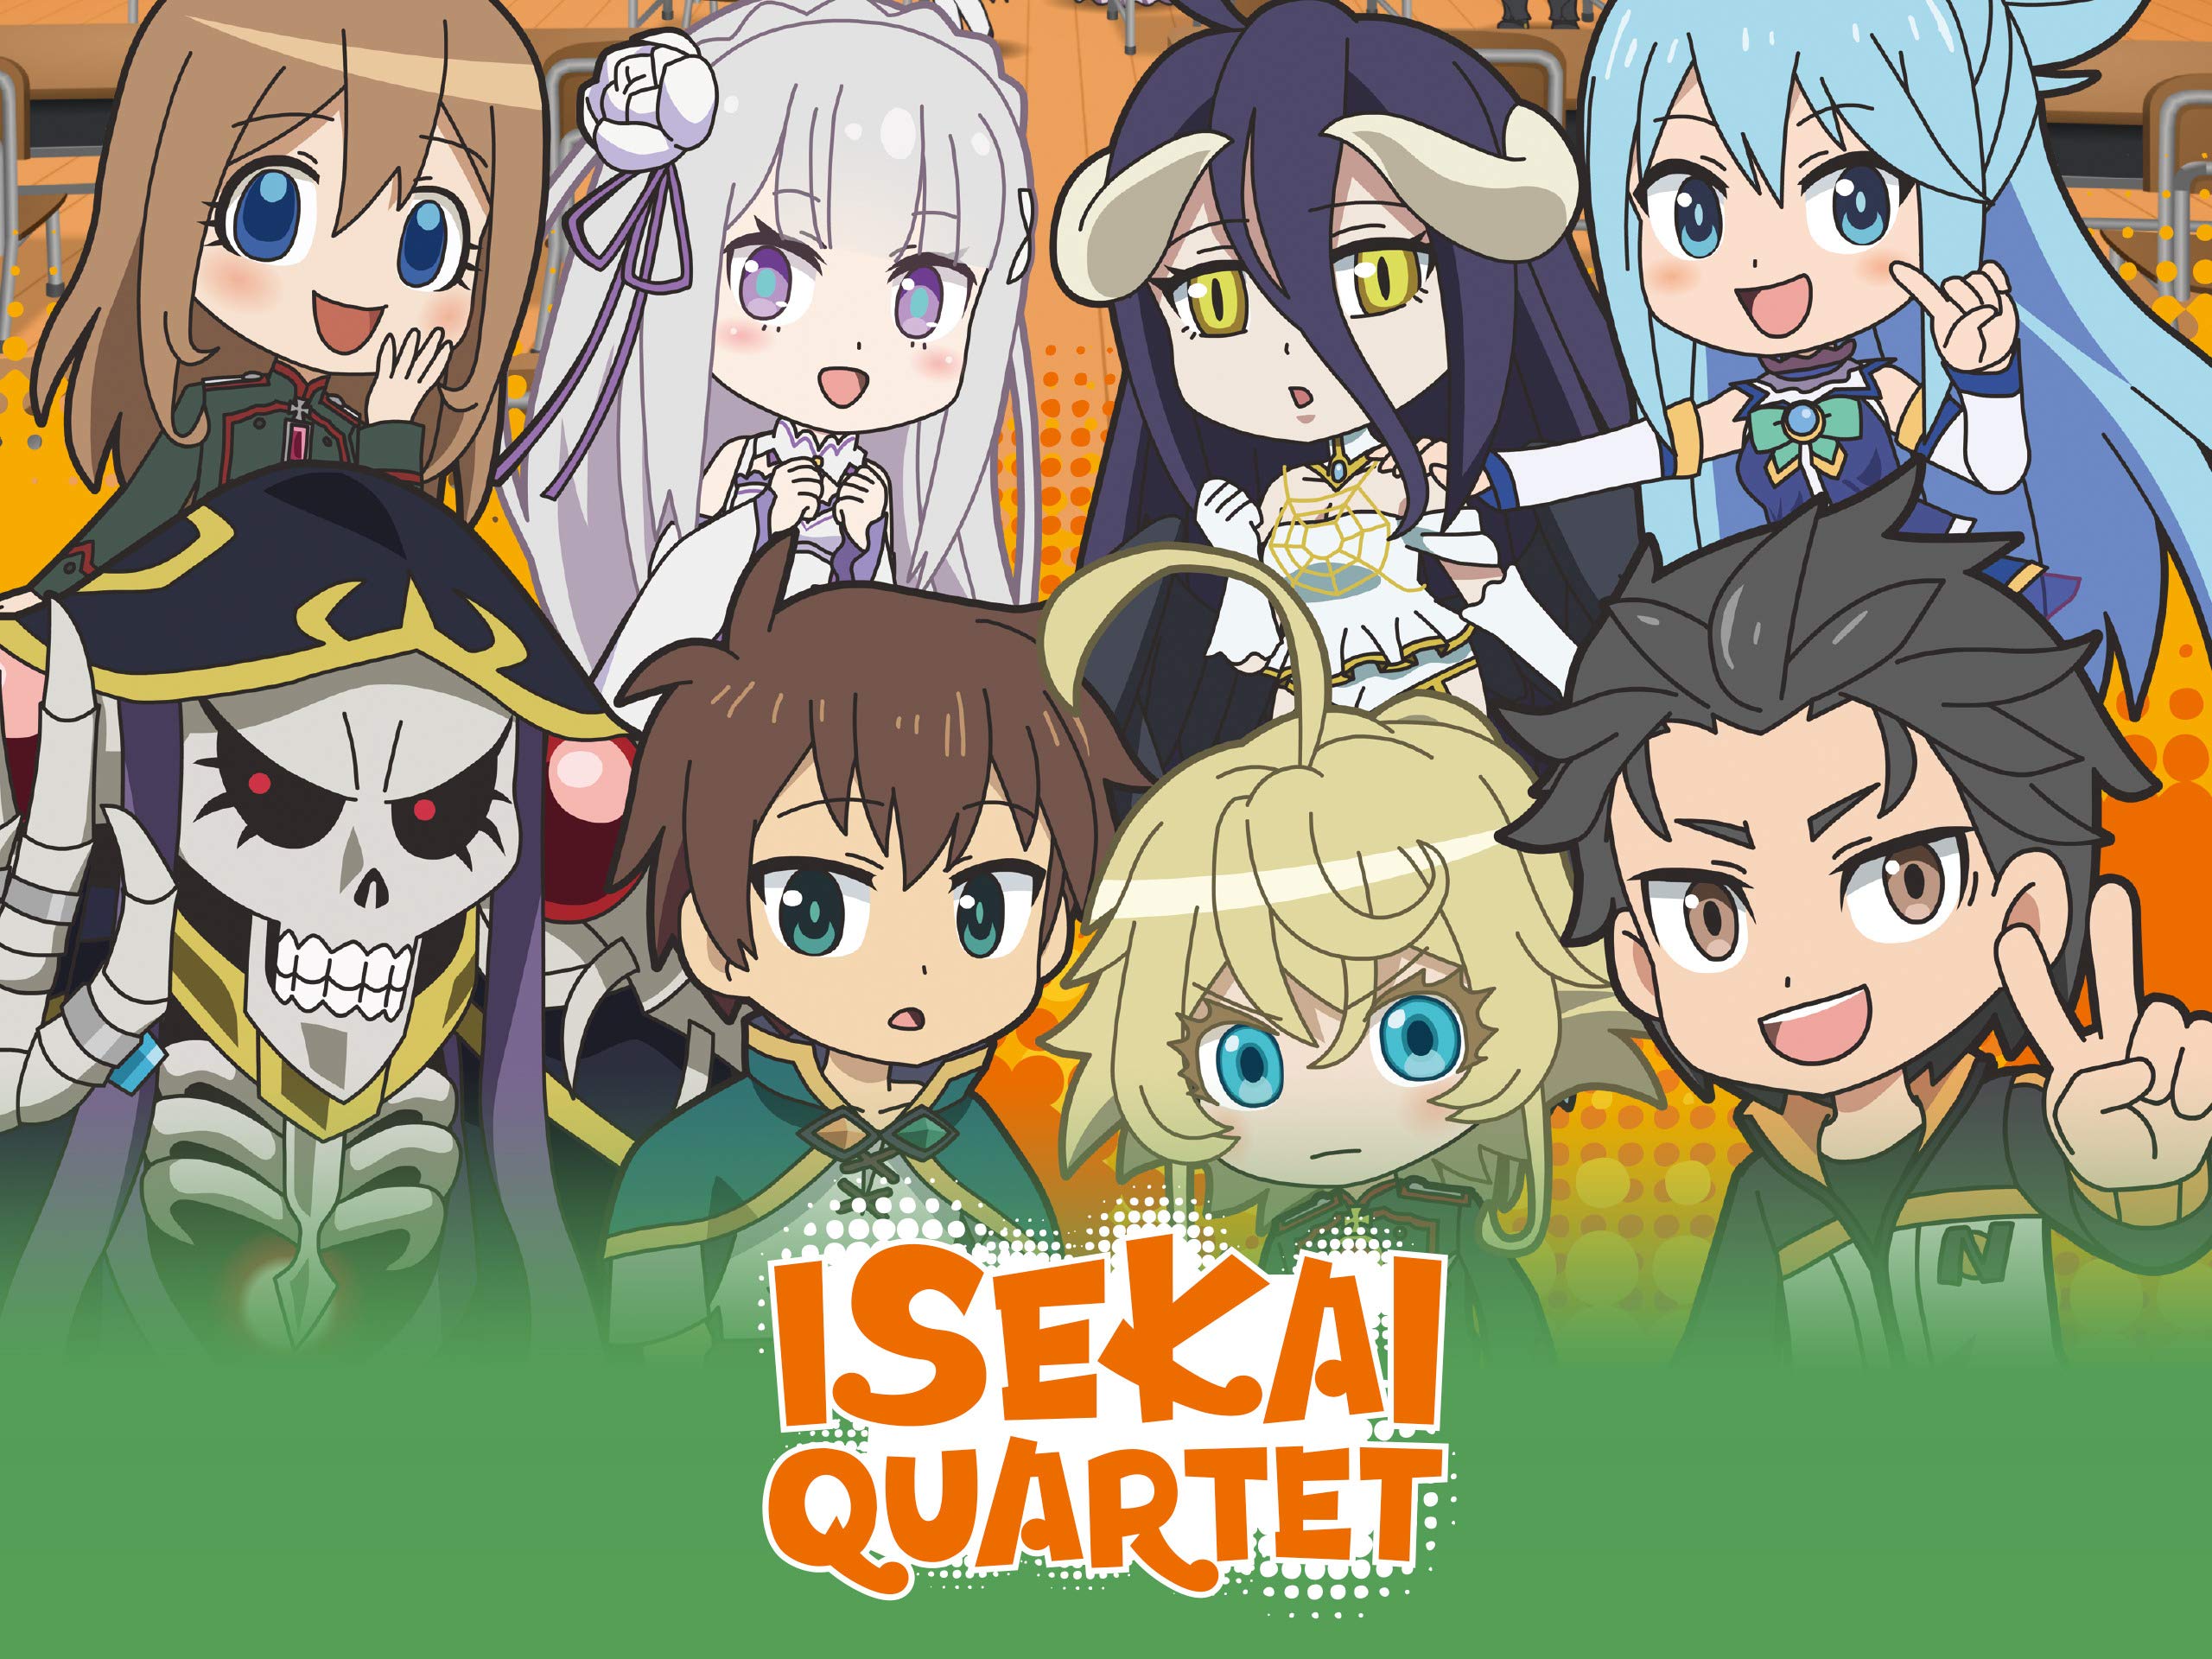 10 of the Best Chibi Anime Series You Should Check Out - Isekai Quartet Poster